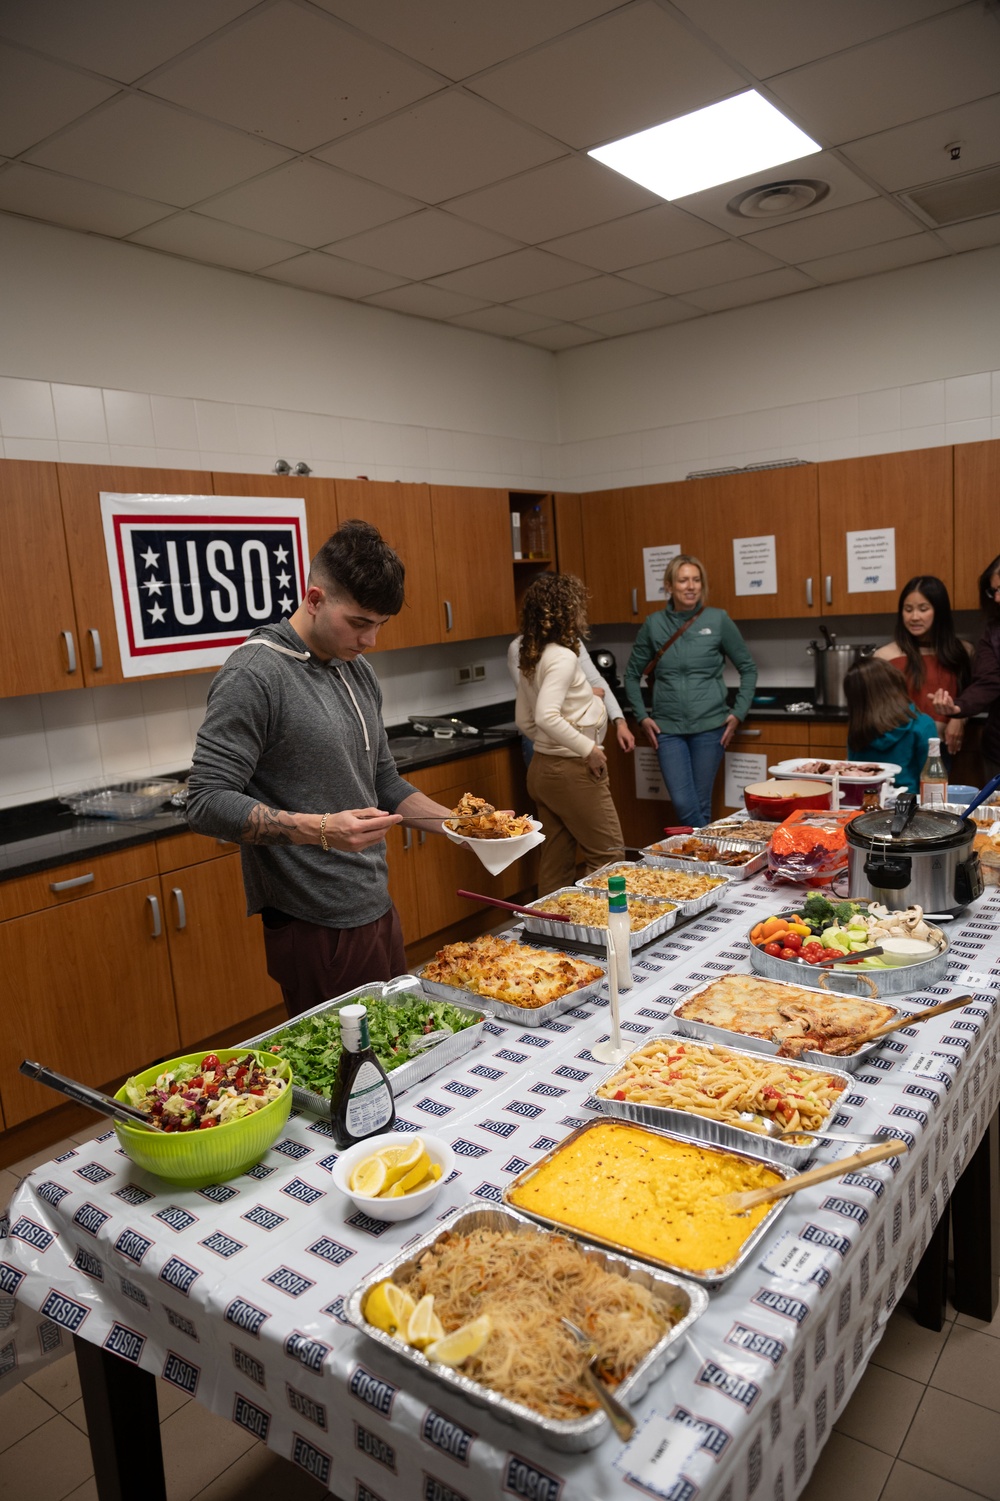 NAVFAC Europe Africa Central Hosts USO Taste of Home Event